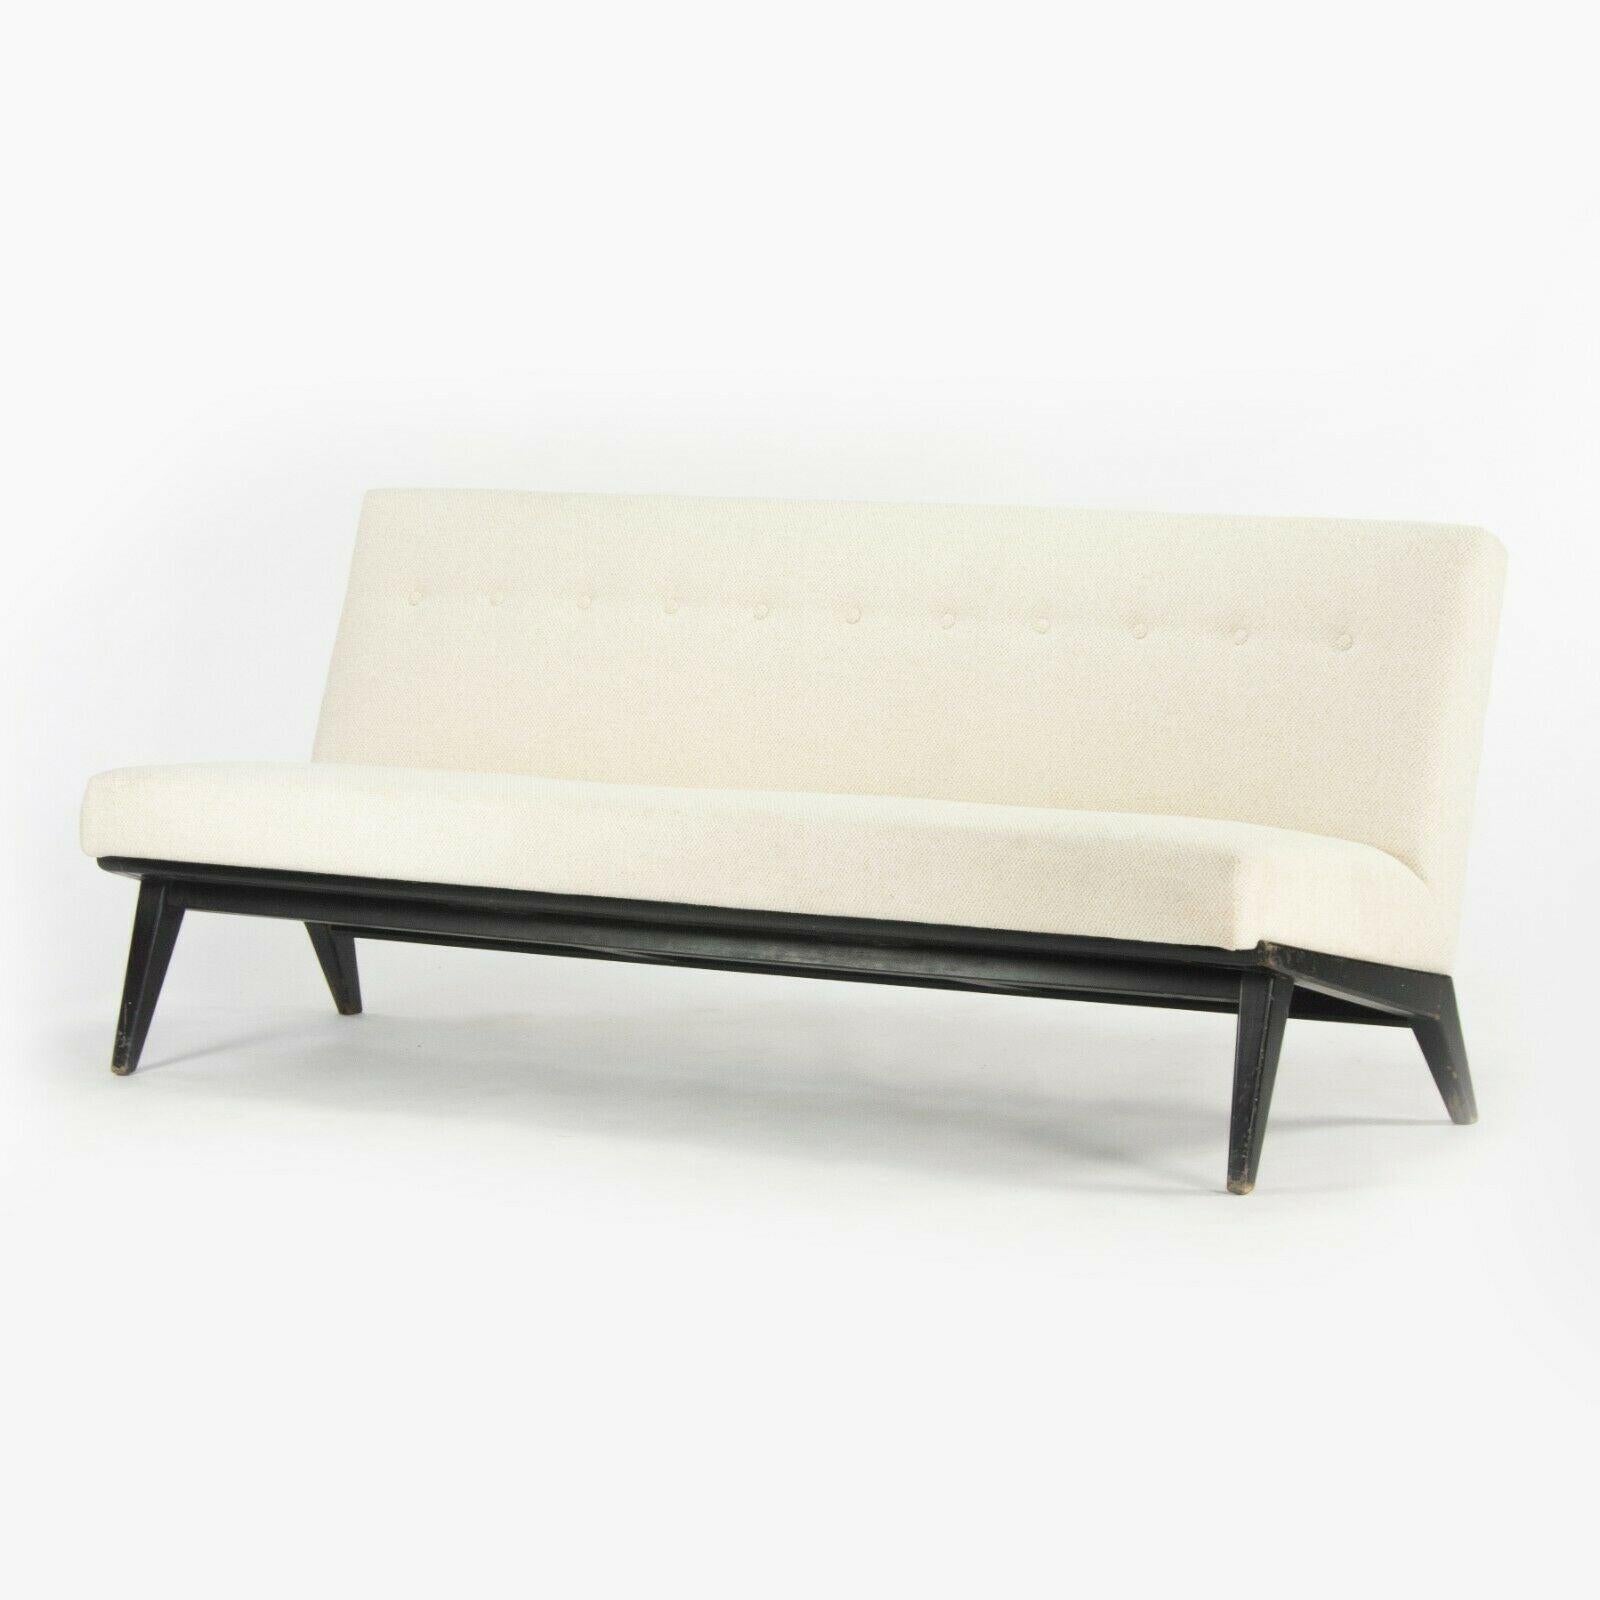 Modern 1949 Jens Risom No. 23 Sofa with New Upholstery Signed H.G. Knoll Products For Sale